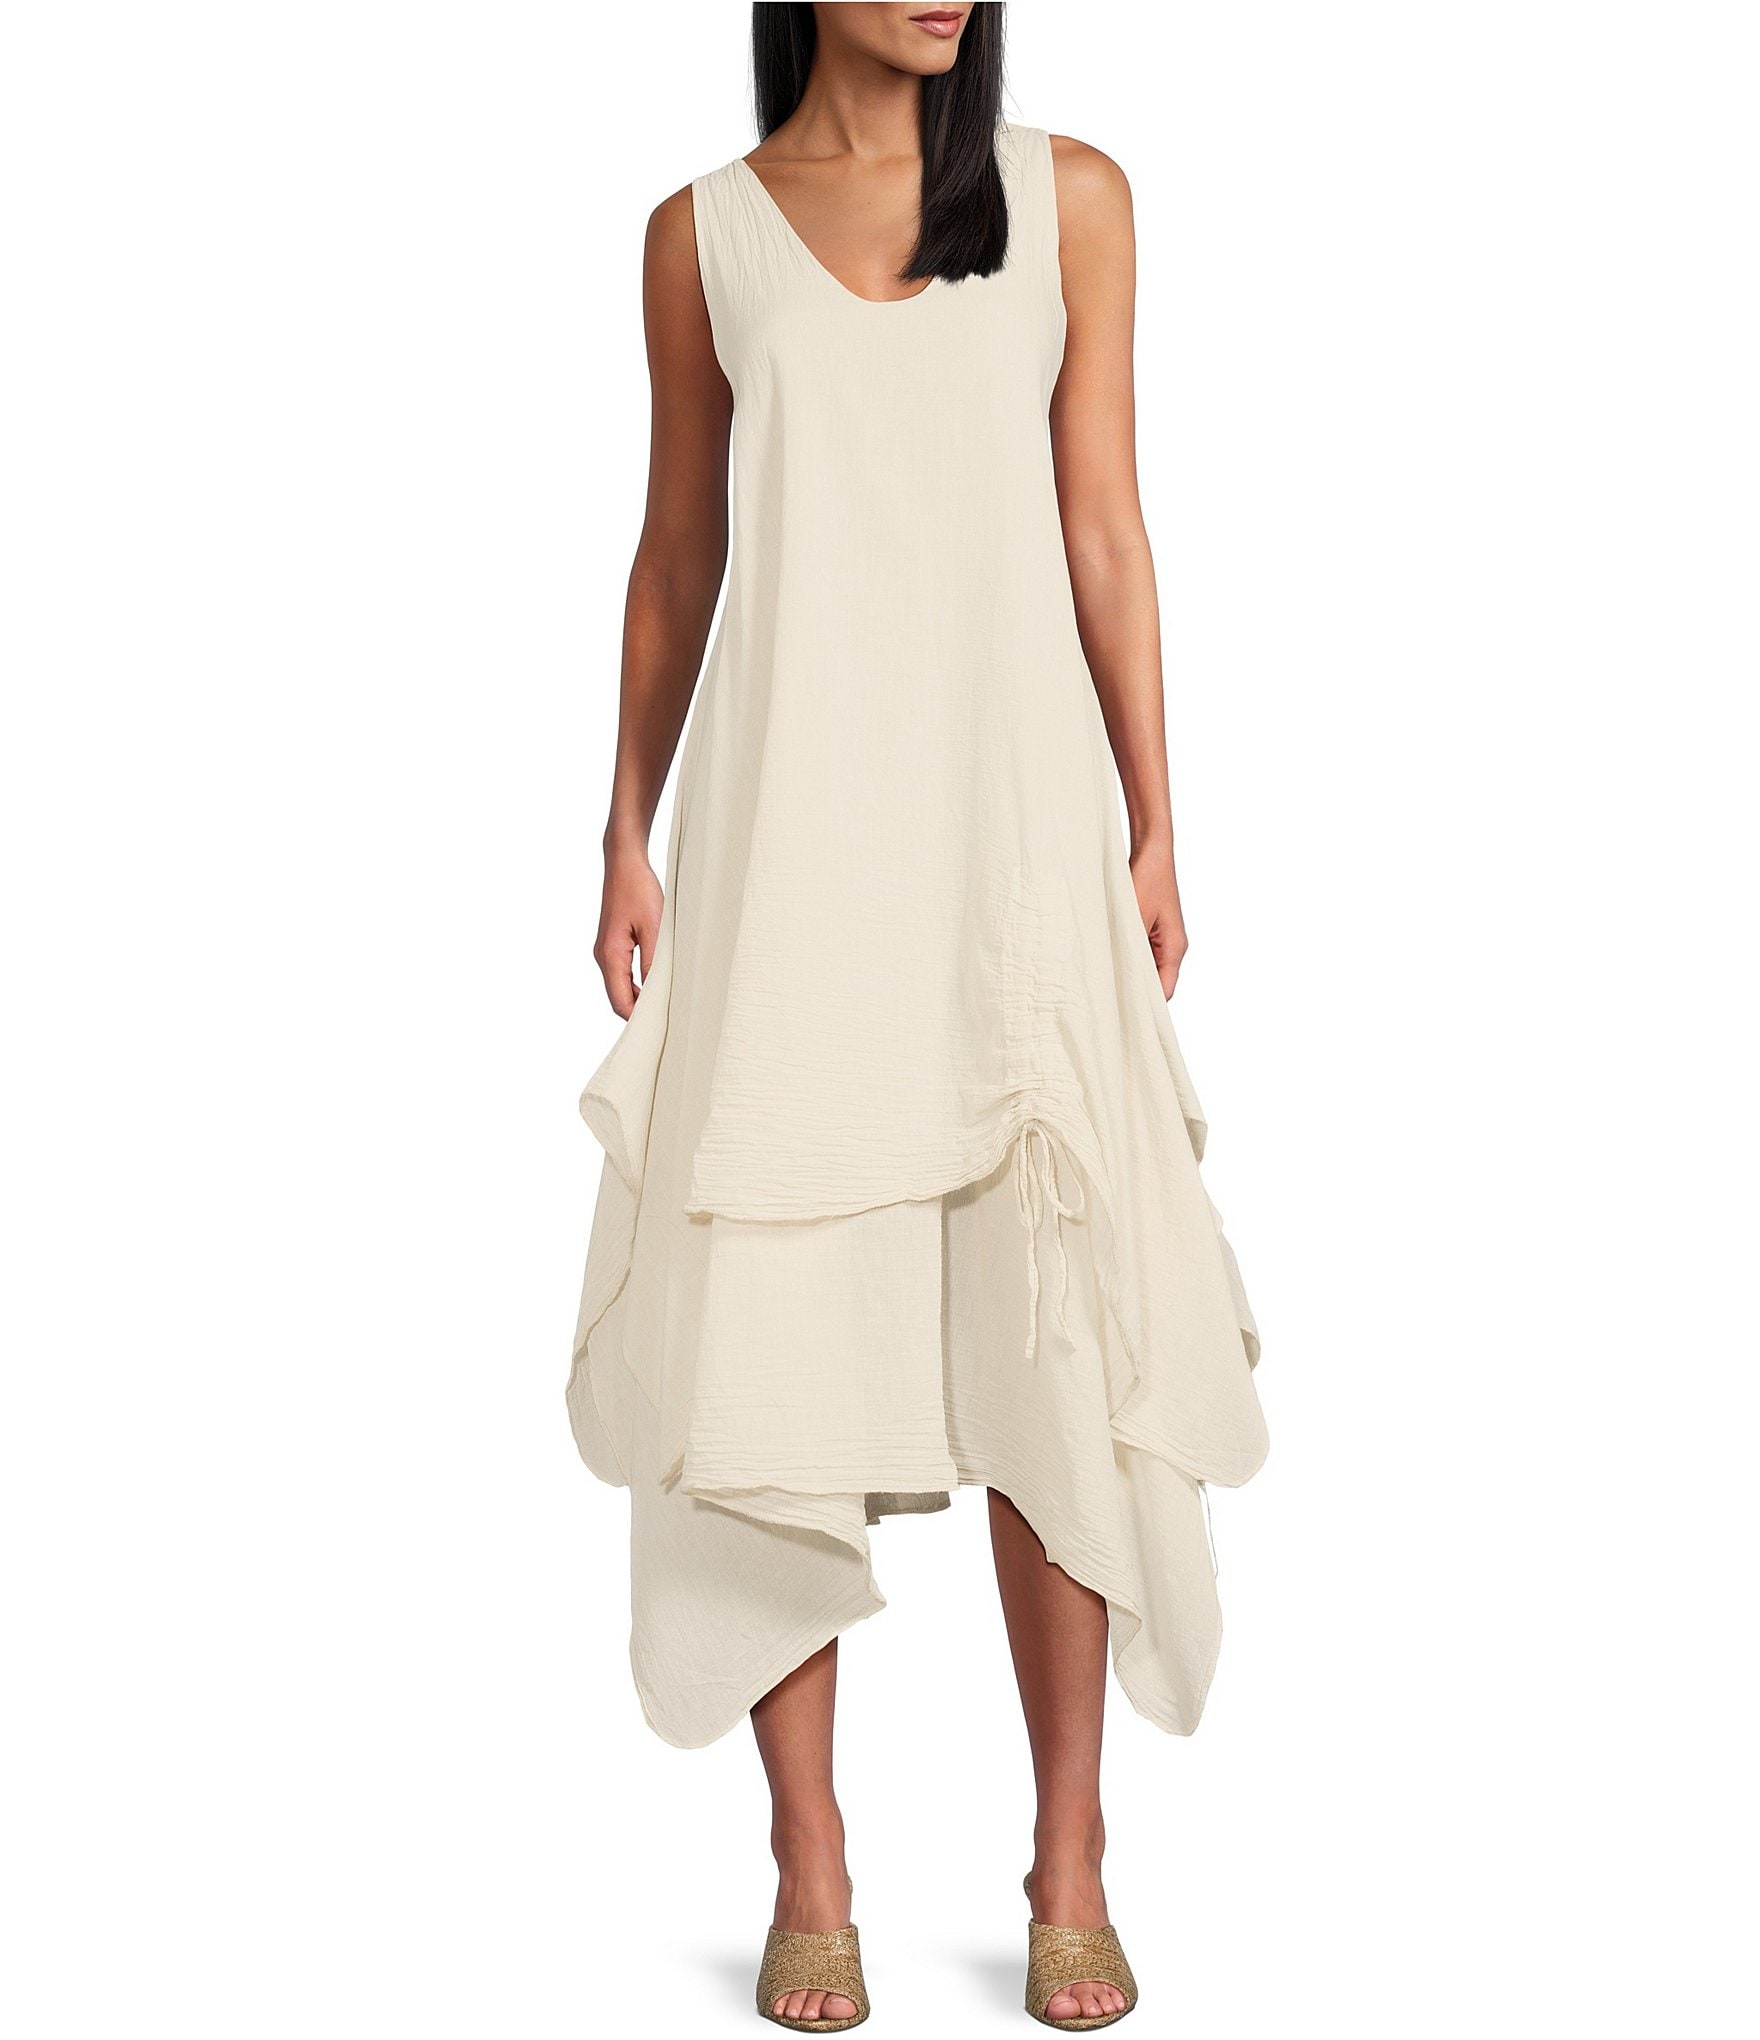 https://dimg.dillards.com/is/image/DillardsZoom/zoom/m-made-in-italy-cotton-gauze-v-neck-sleeveless-layered-ruched-drawstring-midi-a-line-dress/00000000_zi_d9951bdc-2063-4f67-9045-a5a69741a994.jpg